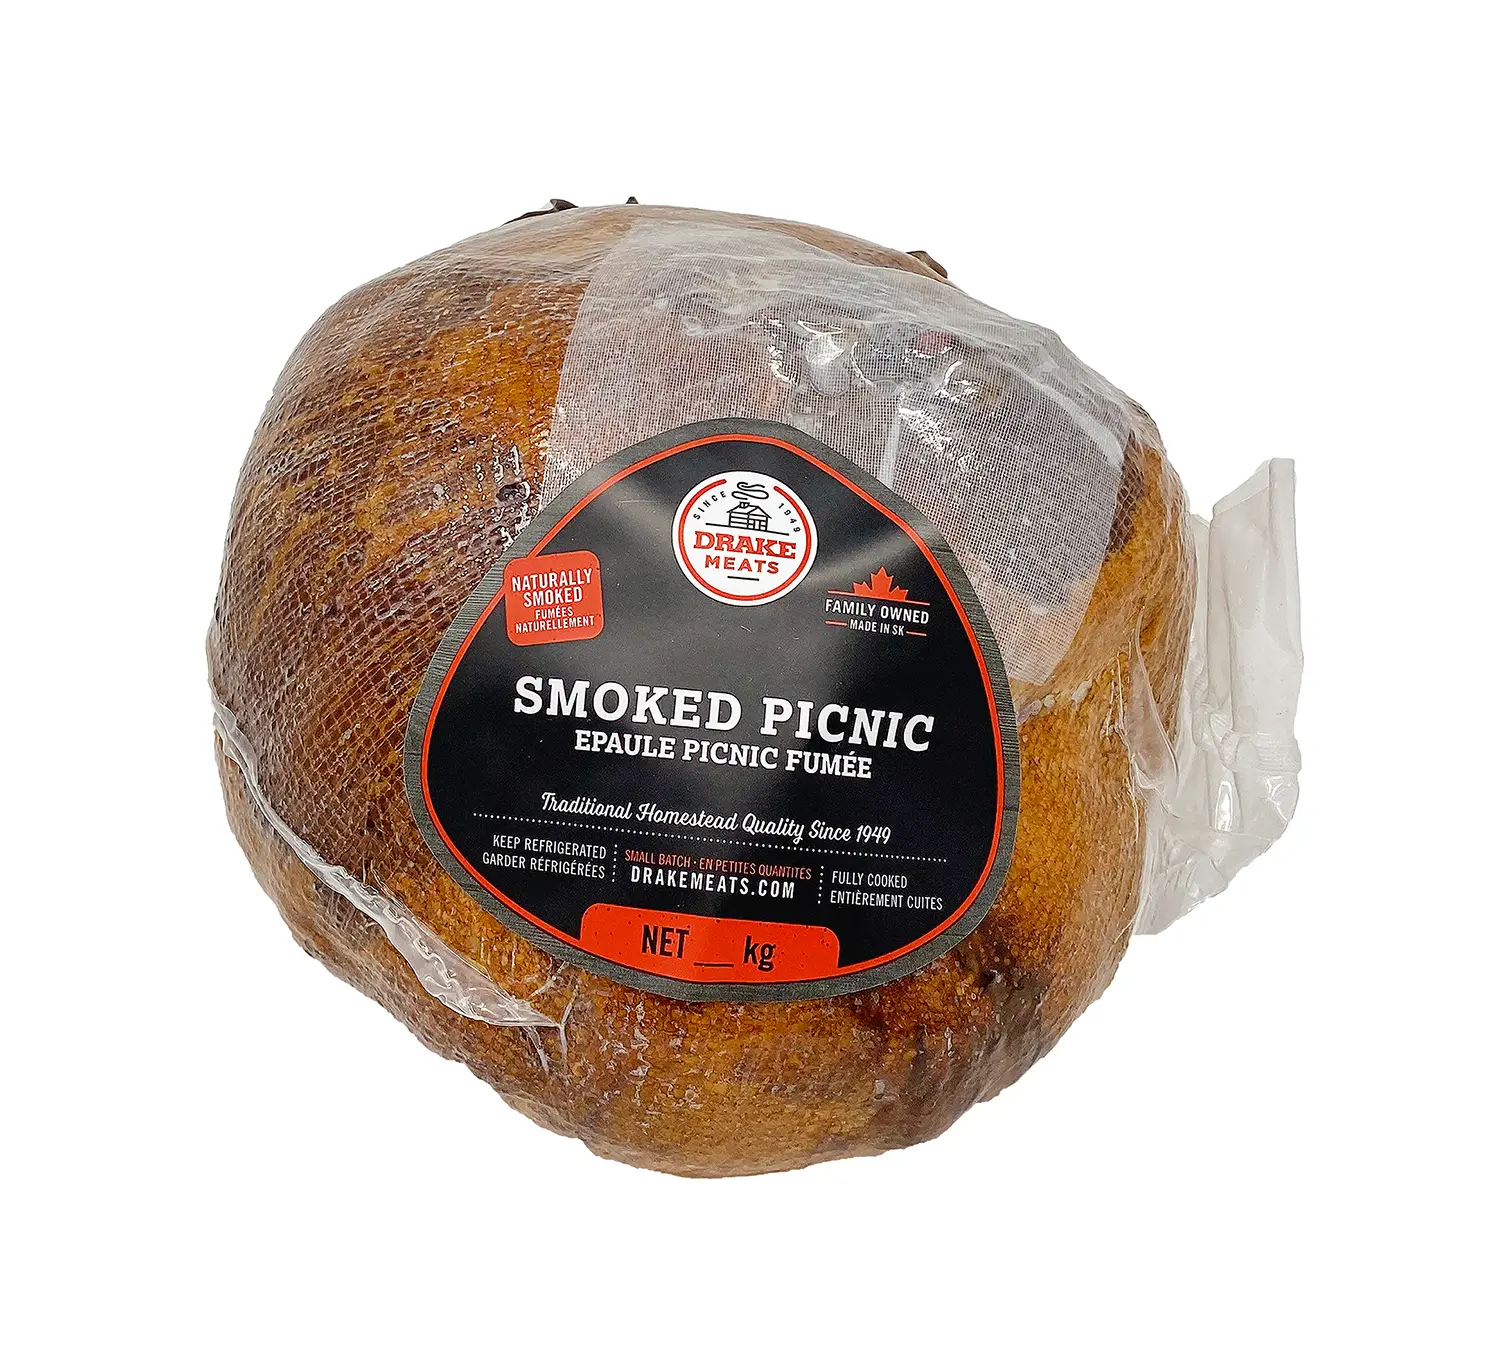 smoked picnic ham where to buy - How much is a picnic ham